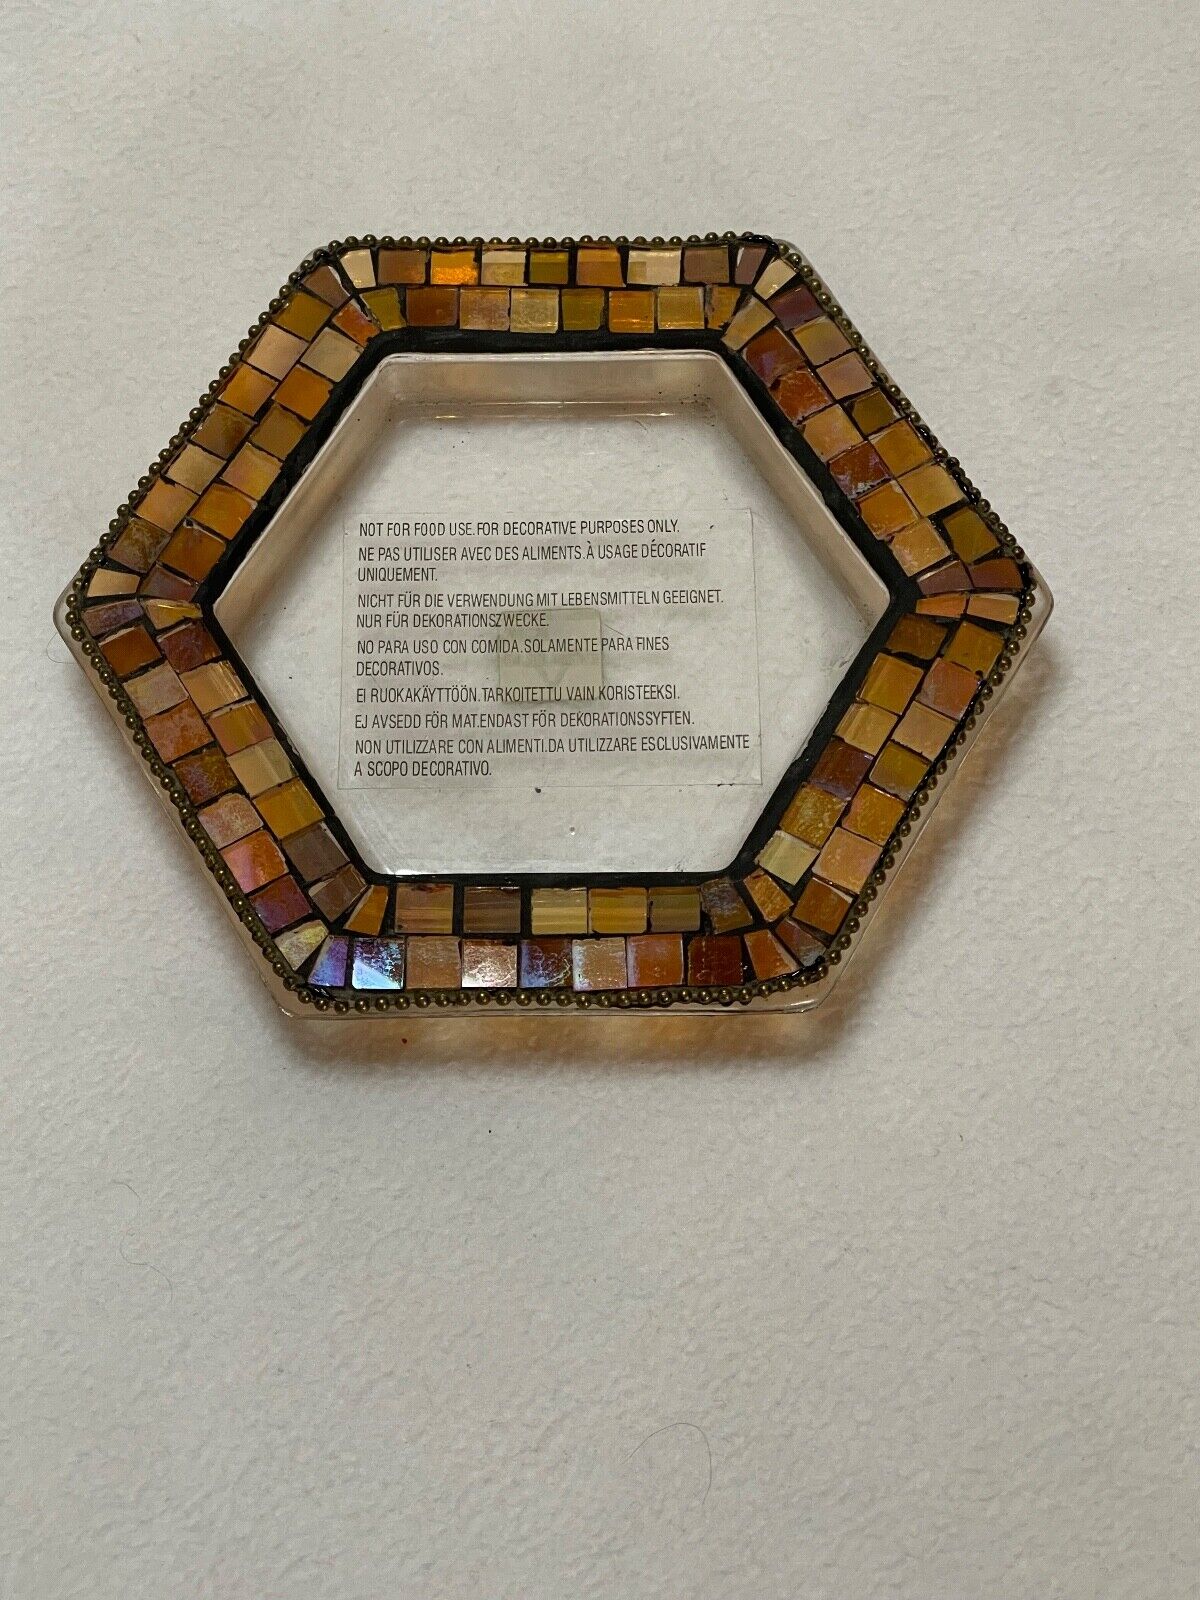 PartyLite Global Fusion Mosaic Decorative Tray Hexagon Candle Holder Plate